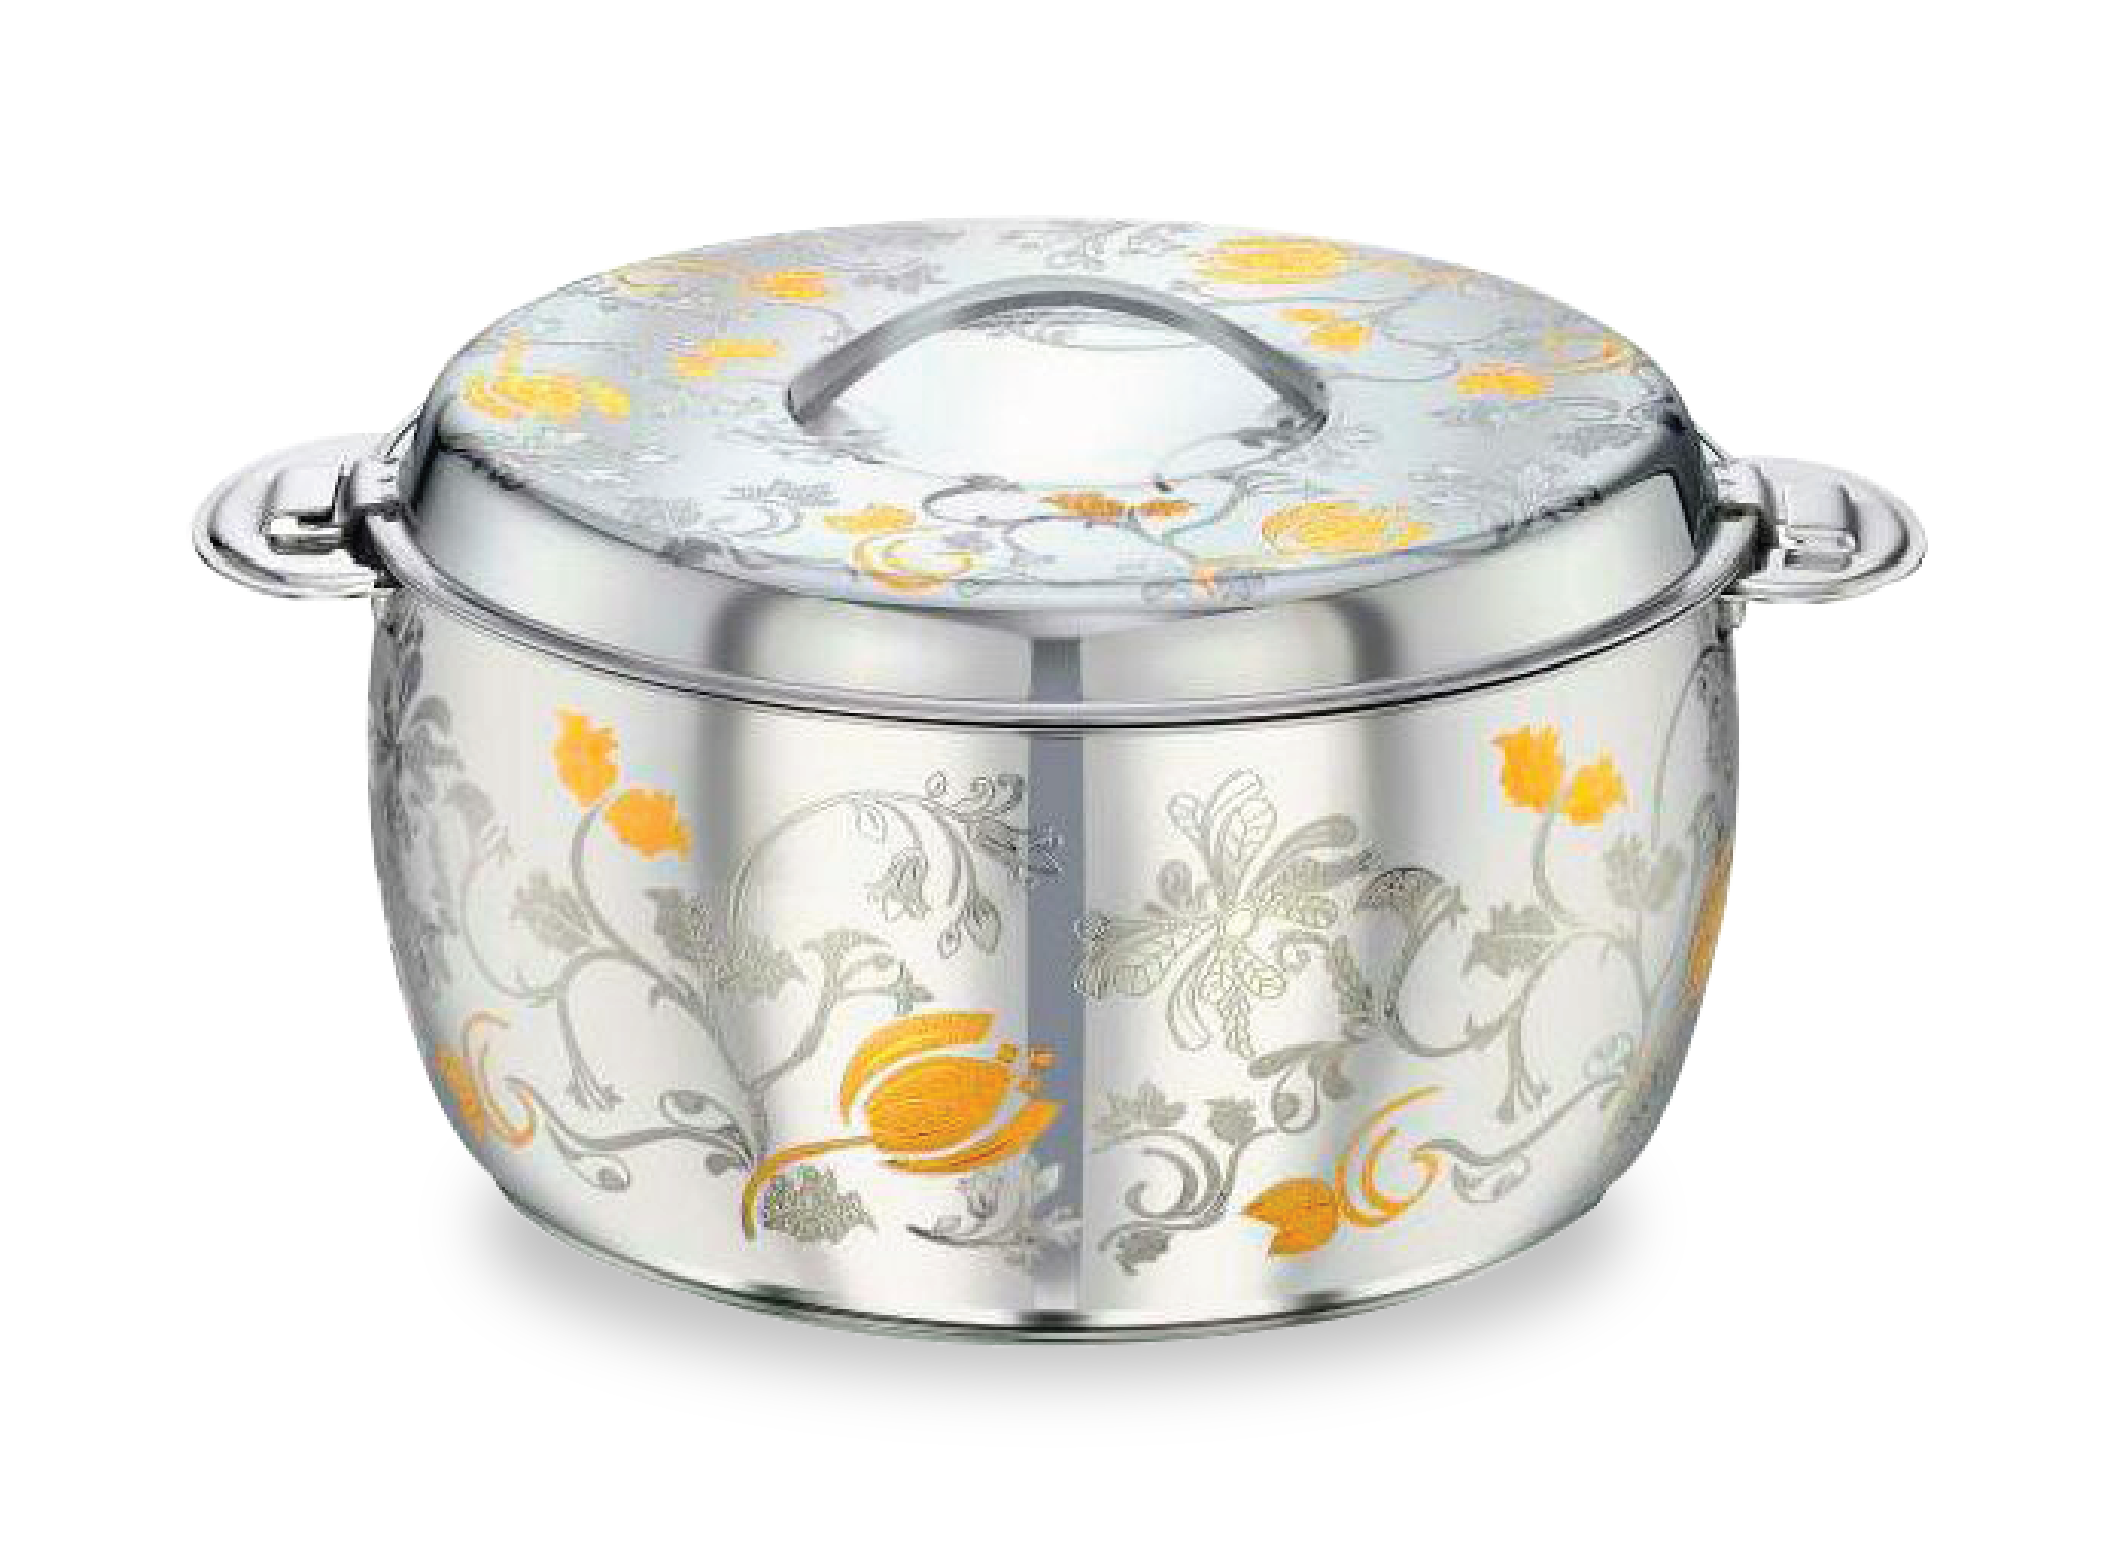 Stainless Steel Insulated Casserole